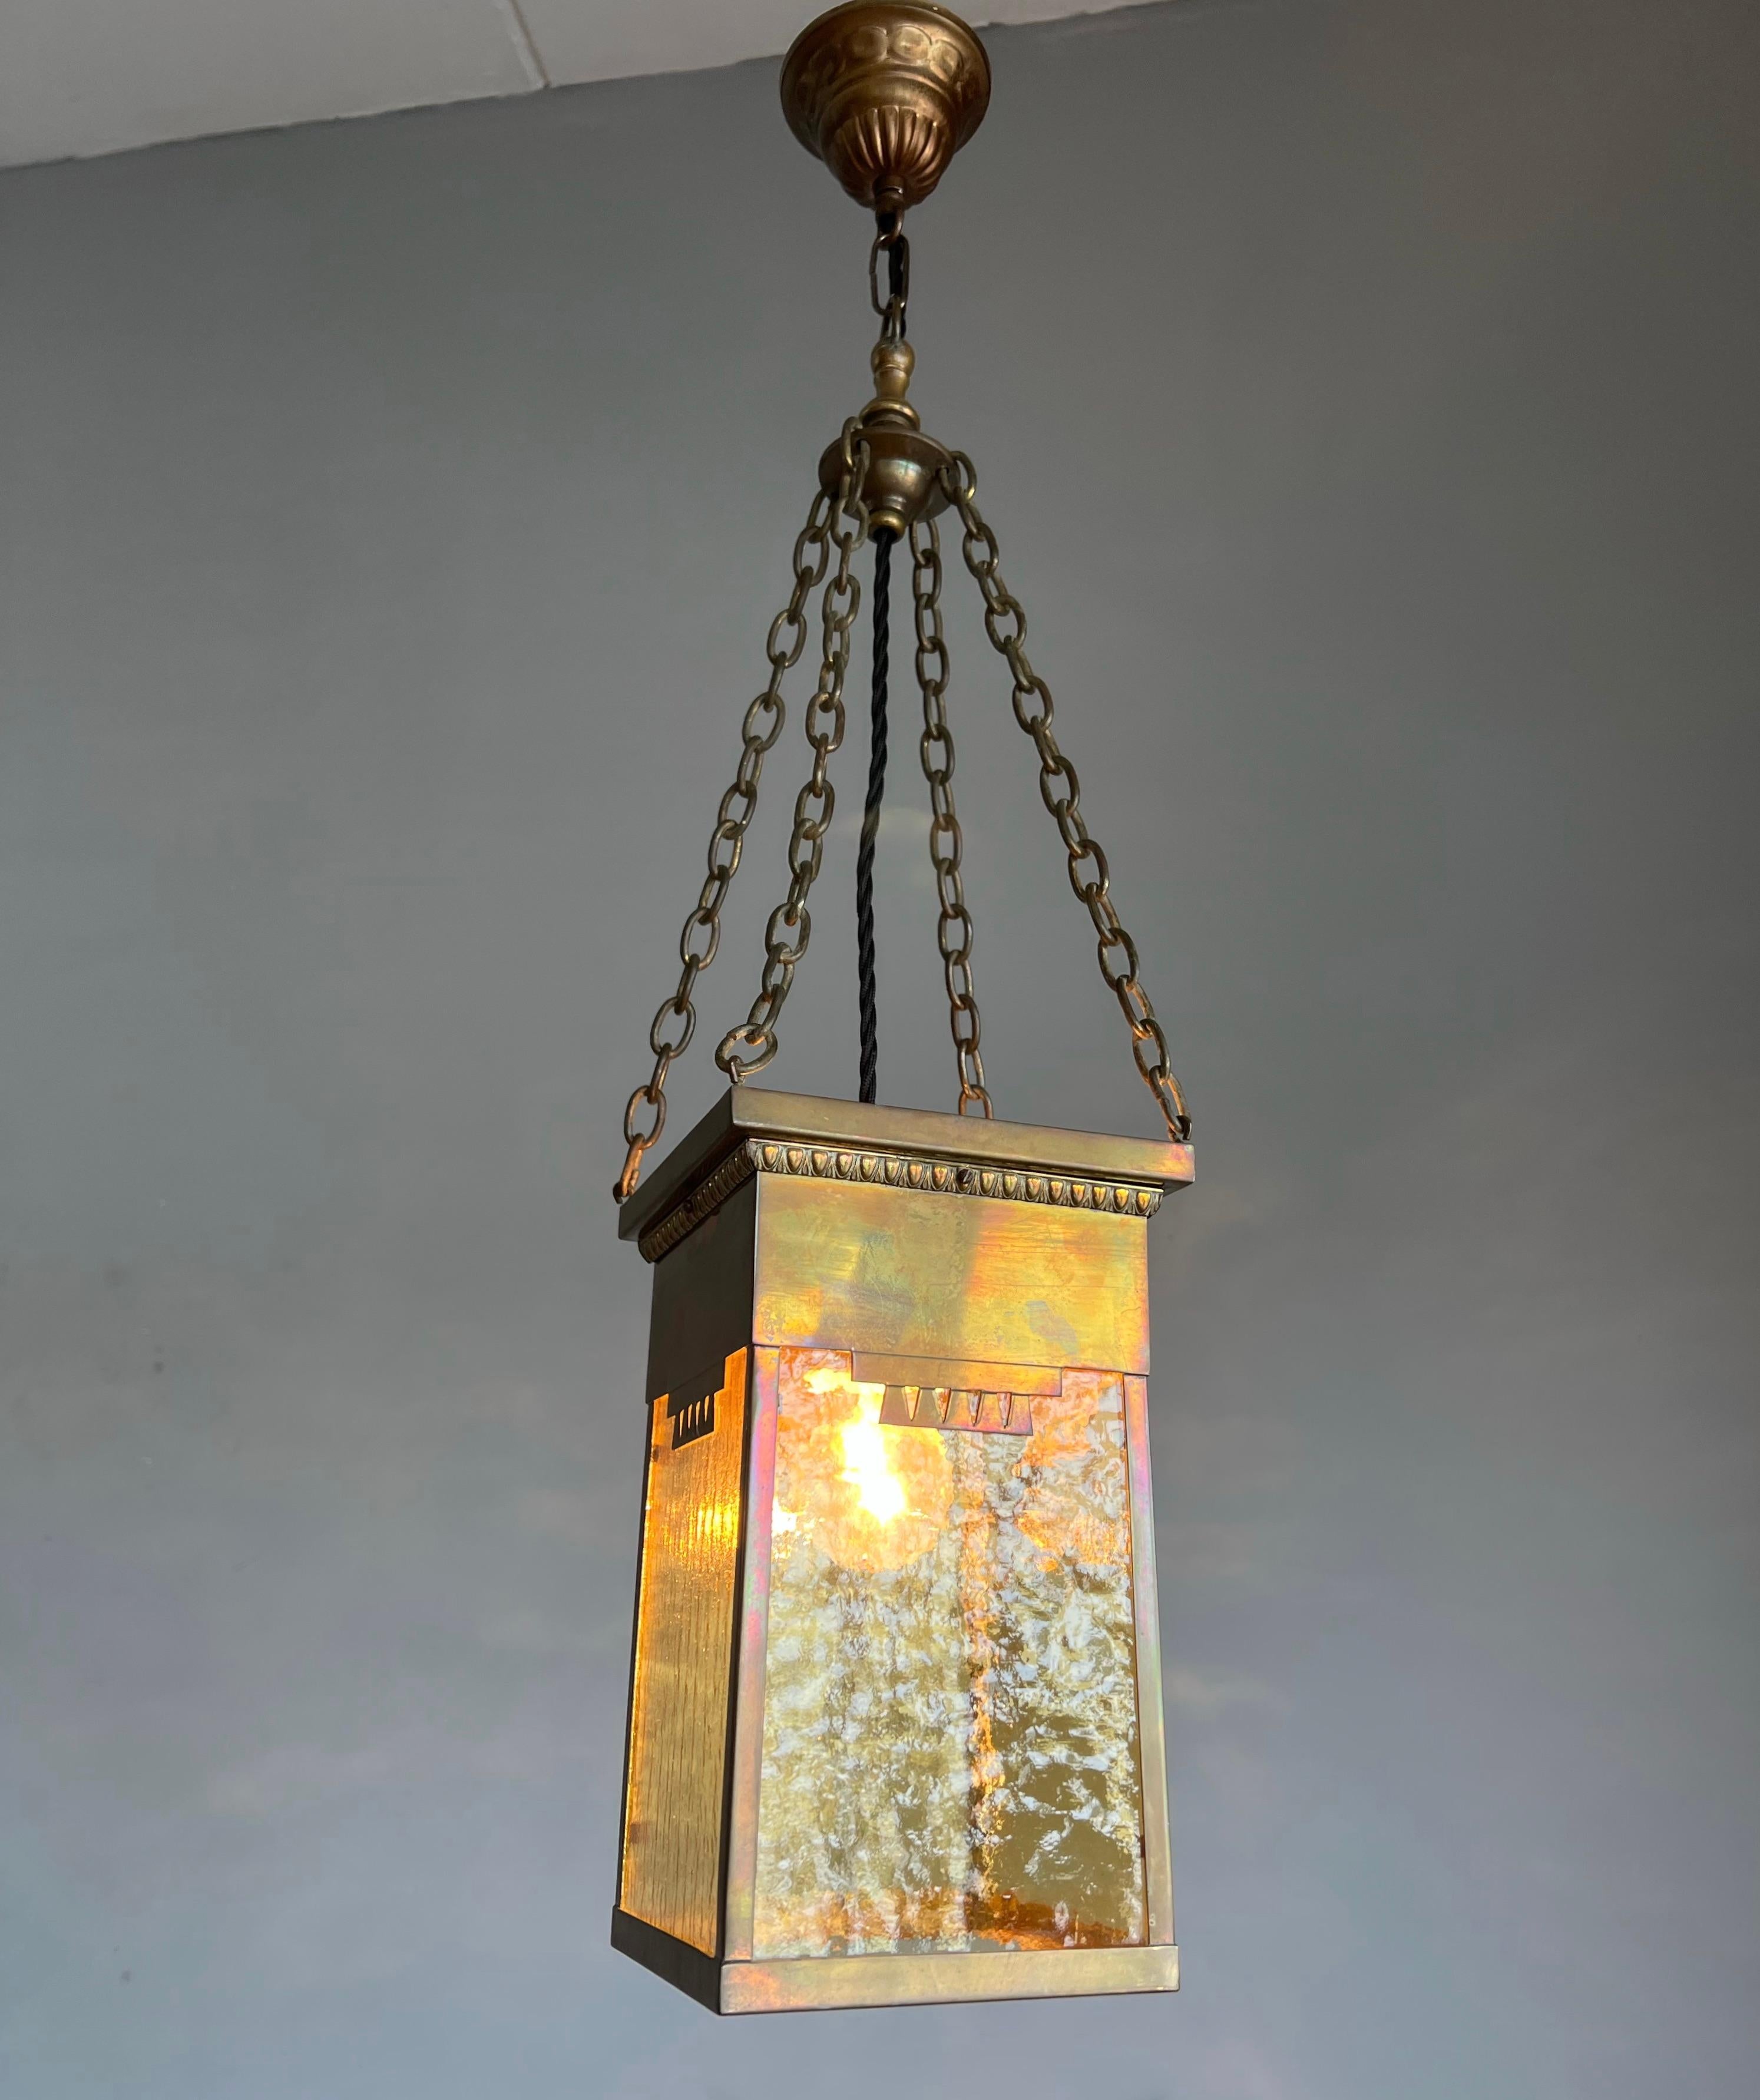 Stunning Arts & Crafts pendant light.

If you are looking for the ideal pendant to light up your entrance, landing or small bedroom than this beauty could be perfect for you. This European, early 1900s, Arts and Crafts pendant is beautiful in shape,